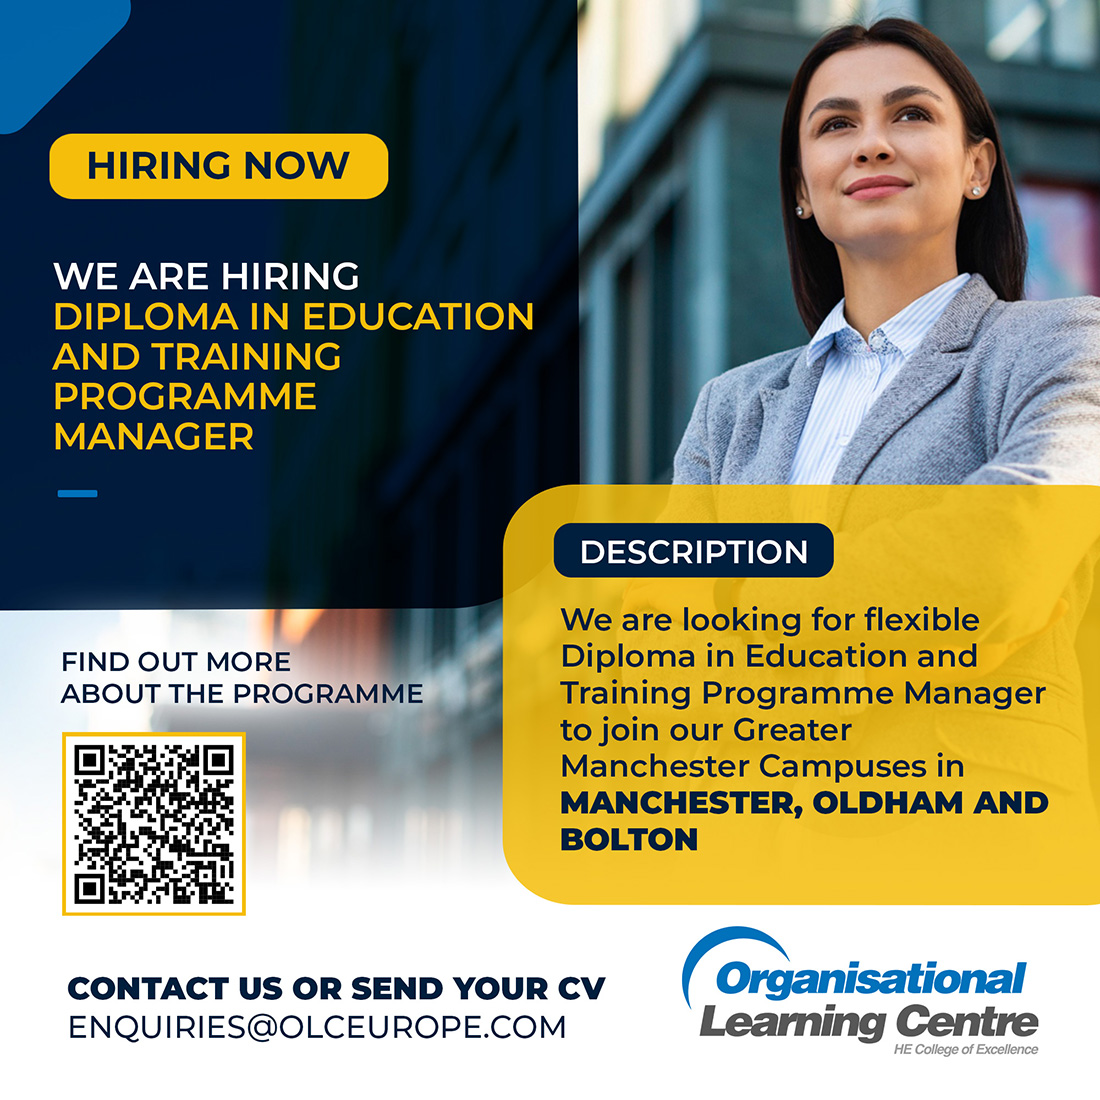 We are looking for flexible diploma in Education And Training Programme Manager.

If you are interested, please send in your CV to enquiries@olceurope.com If you require any further information, then contact us now on 0120452551.

#jobopportunity #programmemanager #ApplyNow